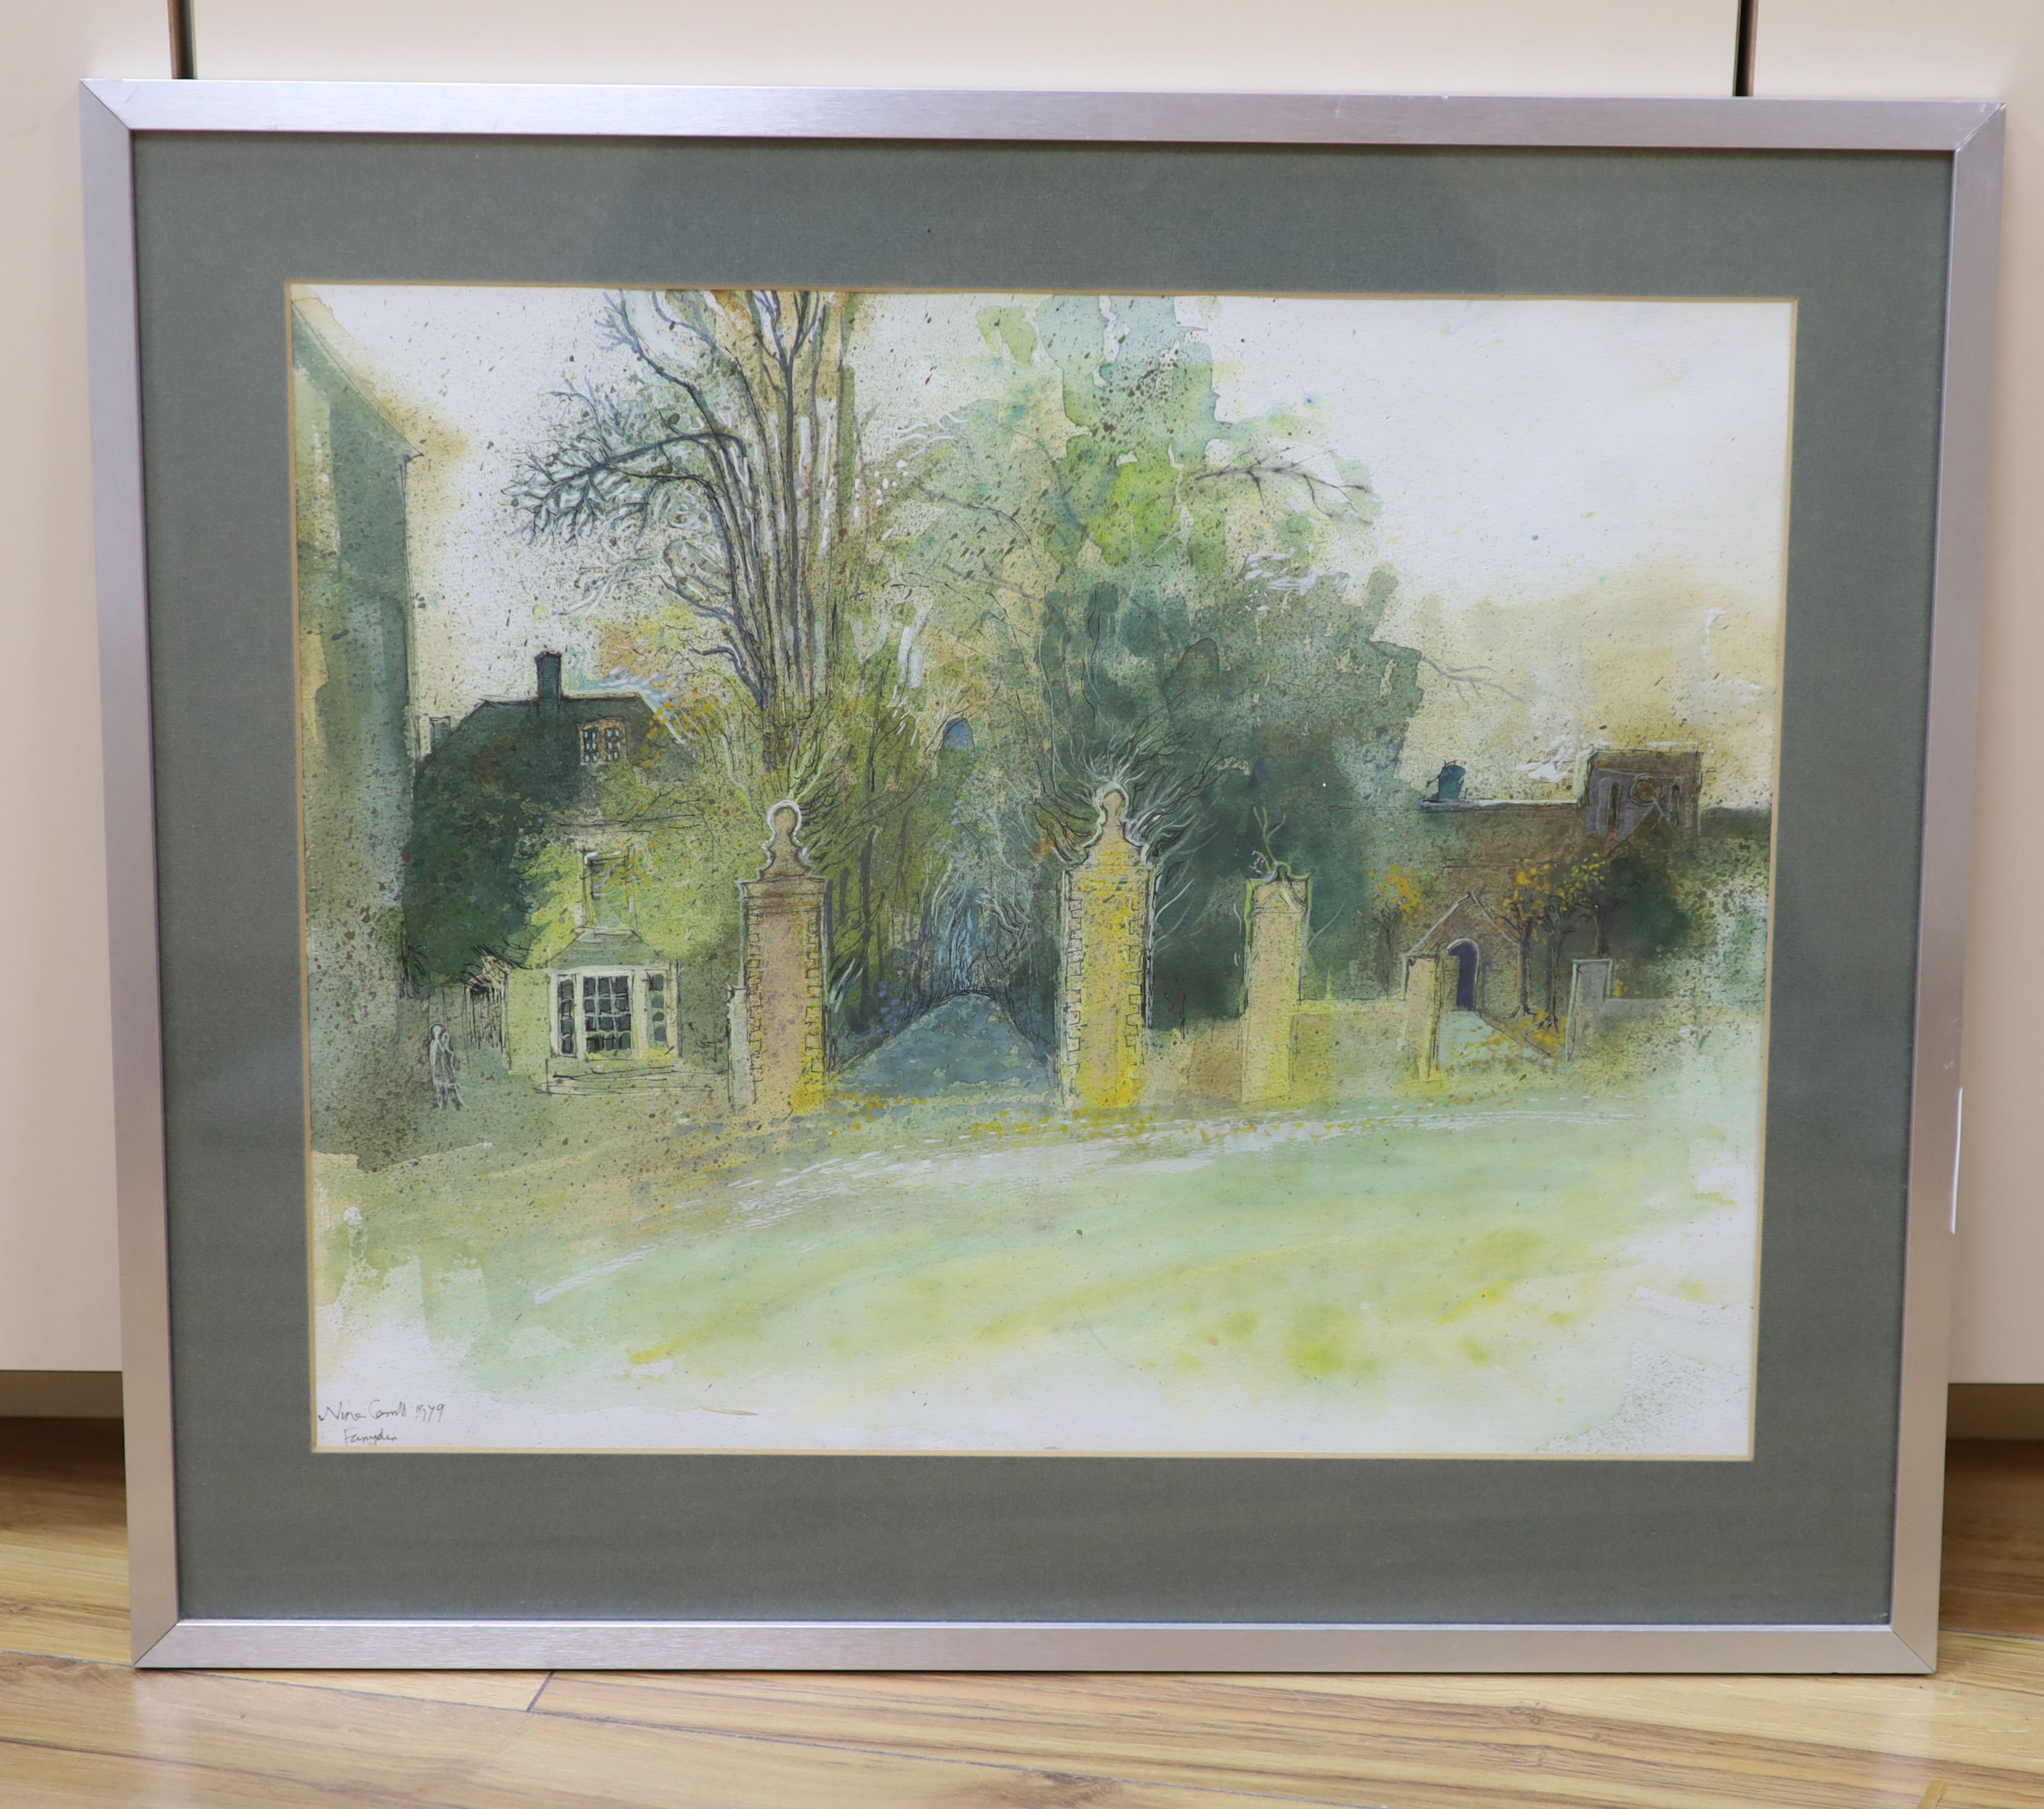 Nina Carroll, ink and watercolour, Faringdon, indistinctly signed and dated 1979, 39 x 48cm